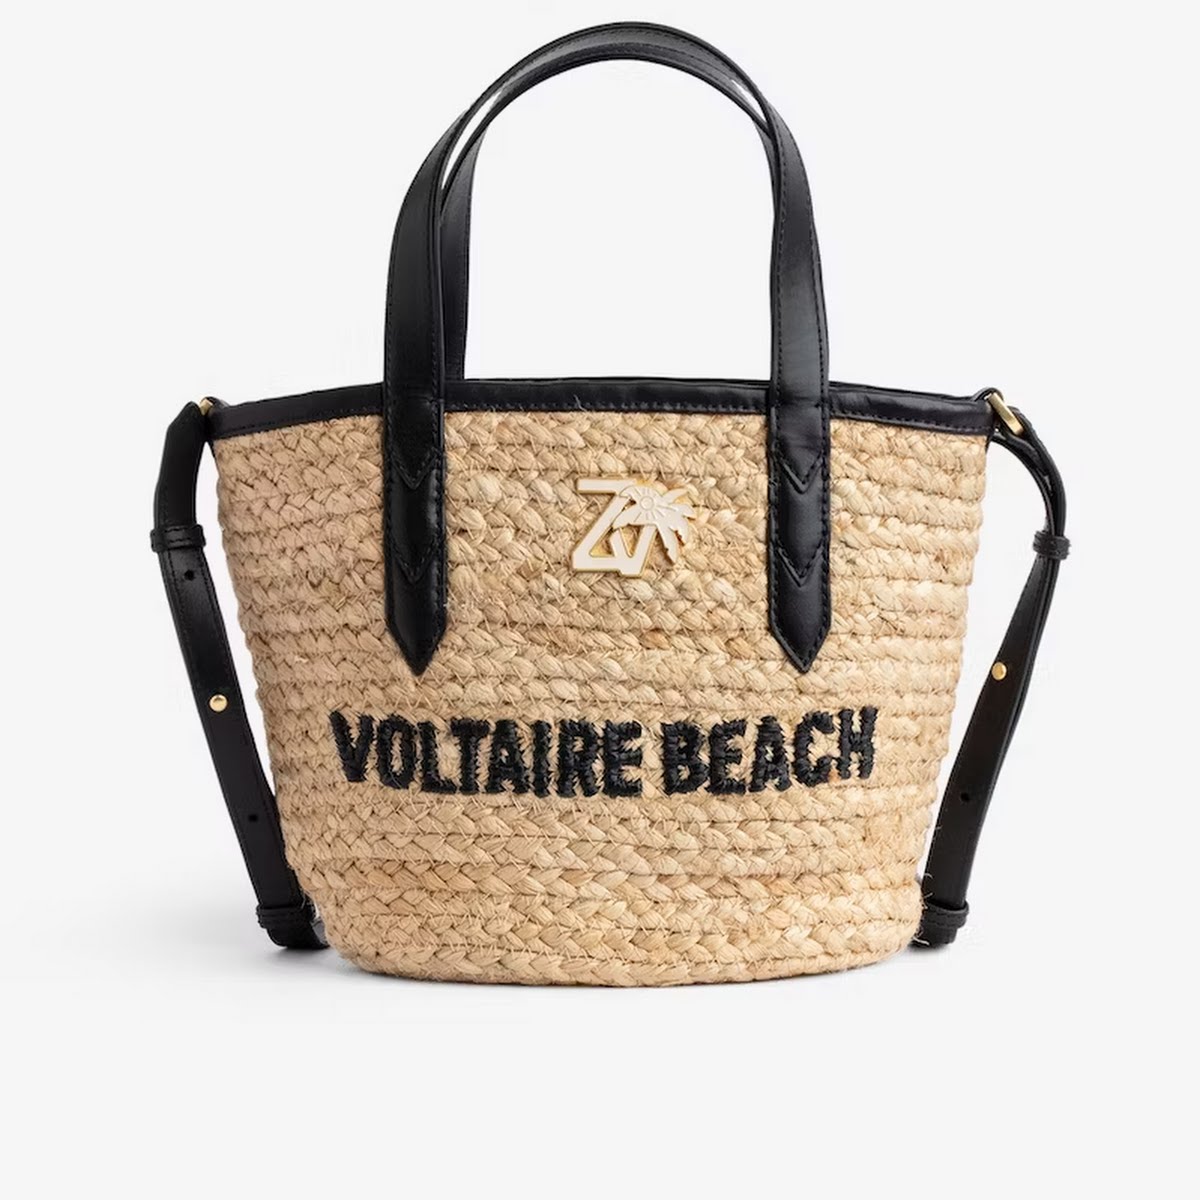 Are you a beach girl or a city girl? These basket bags work for both ...